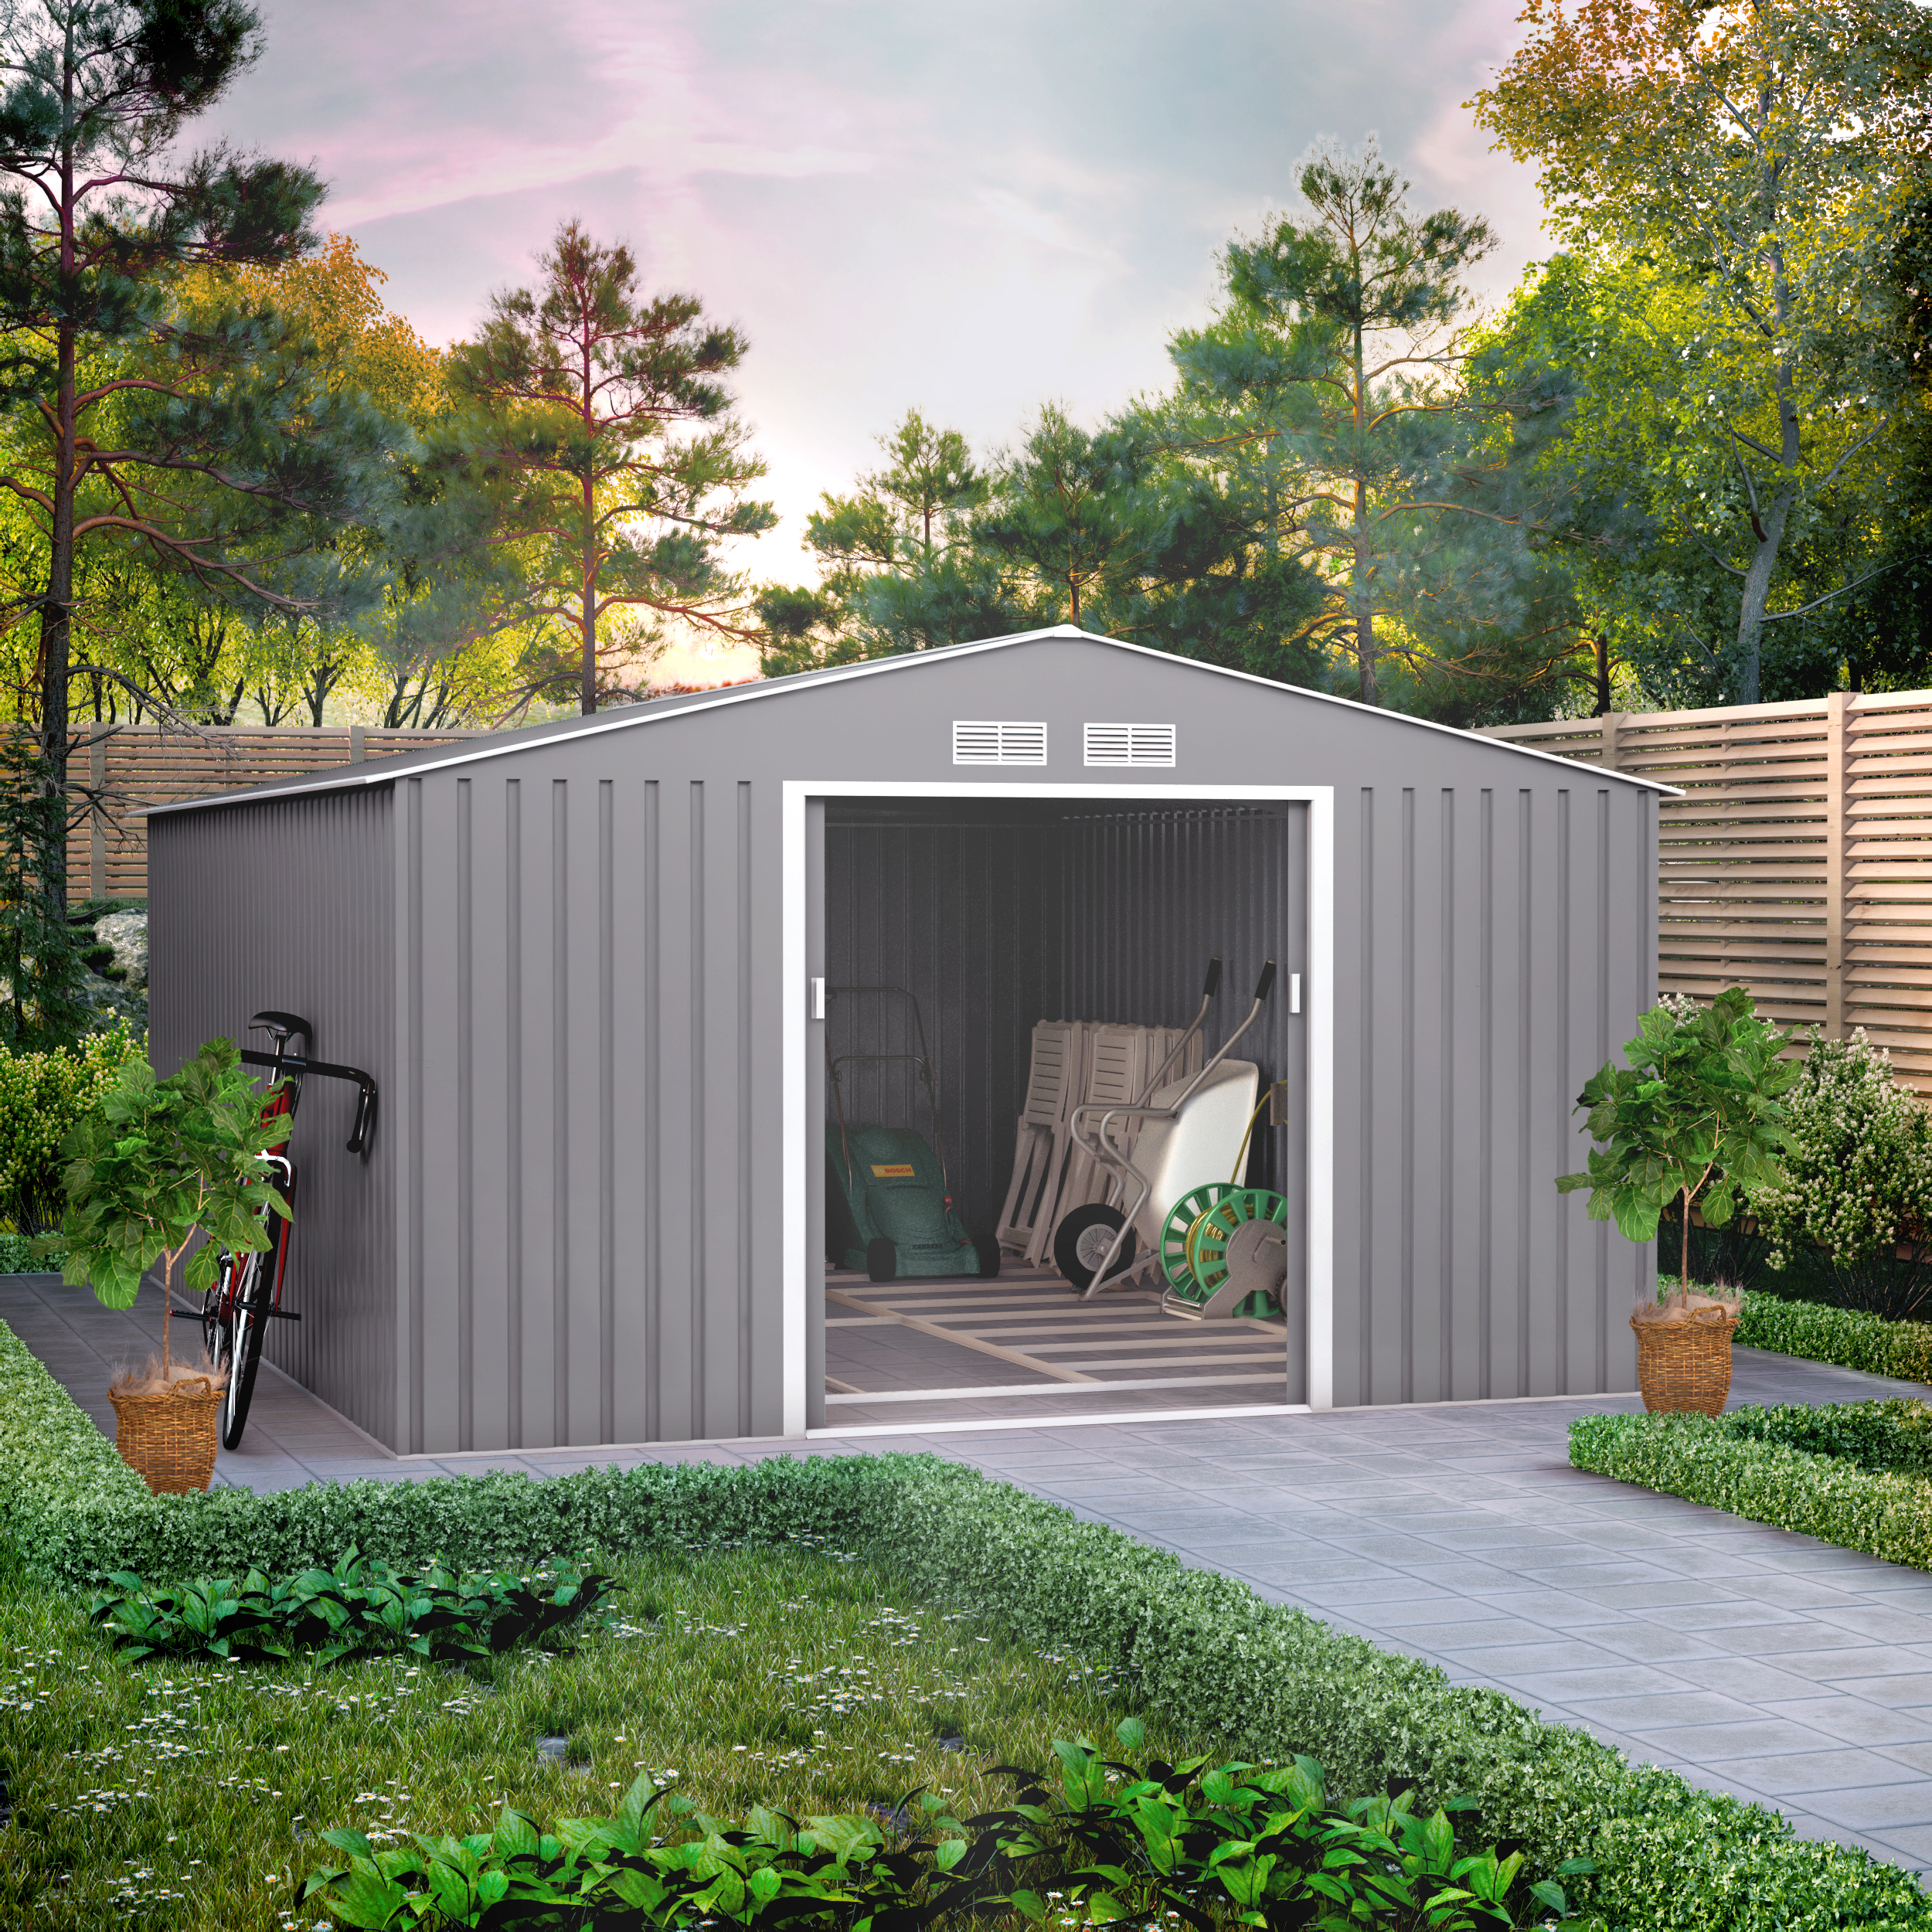 11x14 Ranger Apex Metal Shed With Foundation Kit - Light Grey BillyOh